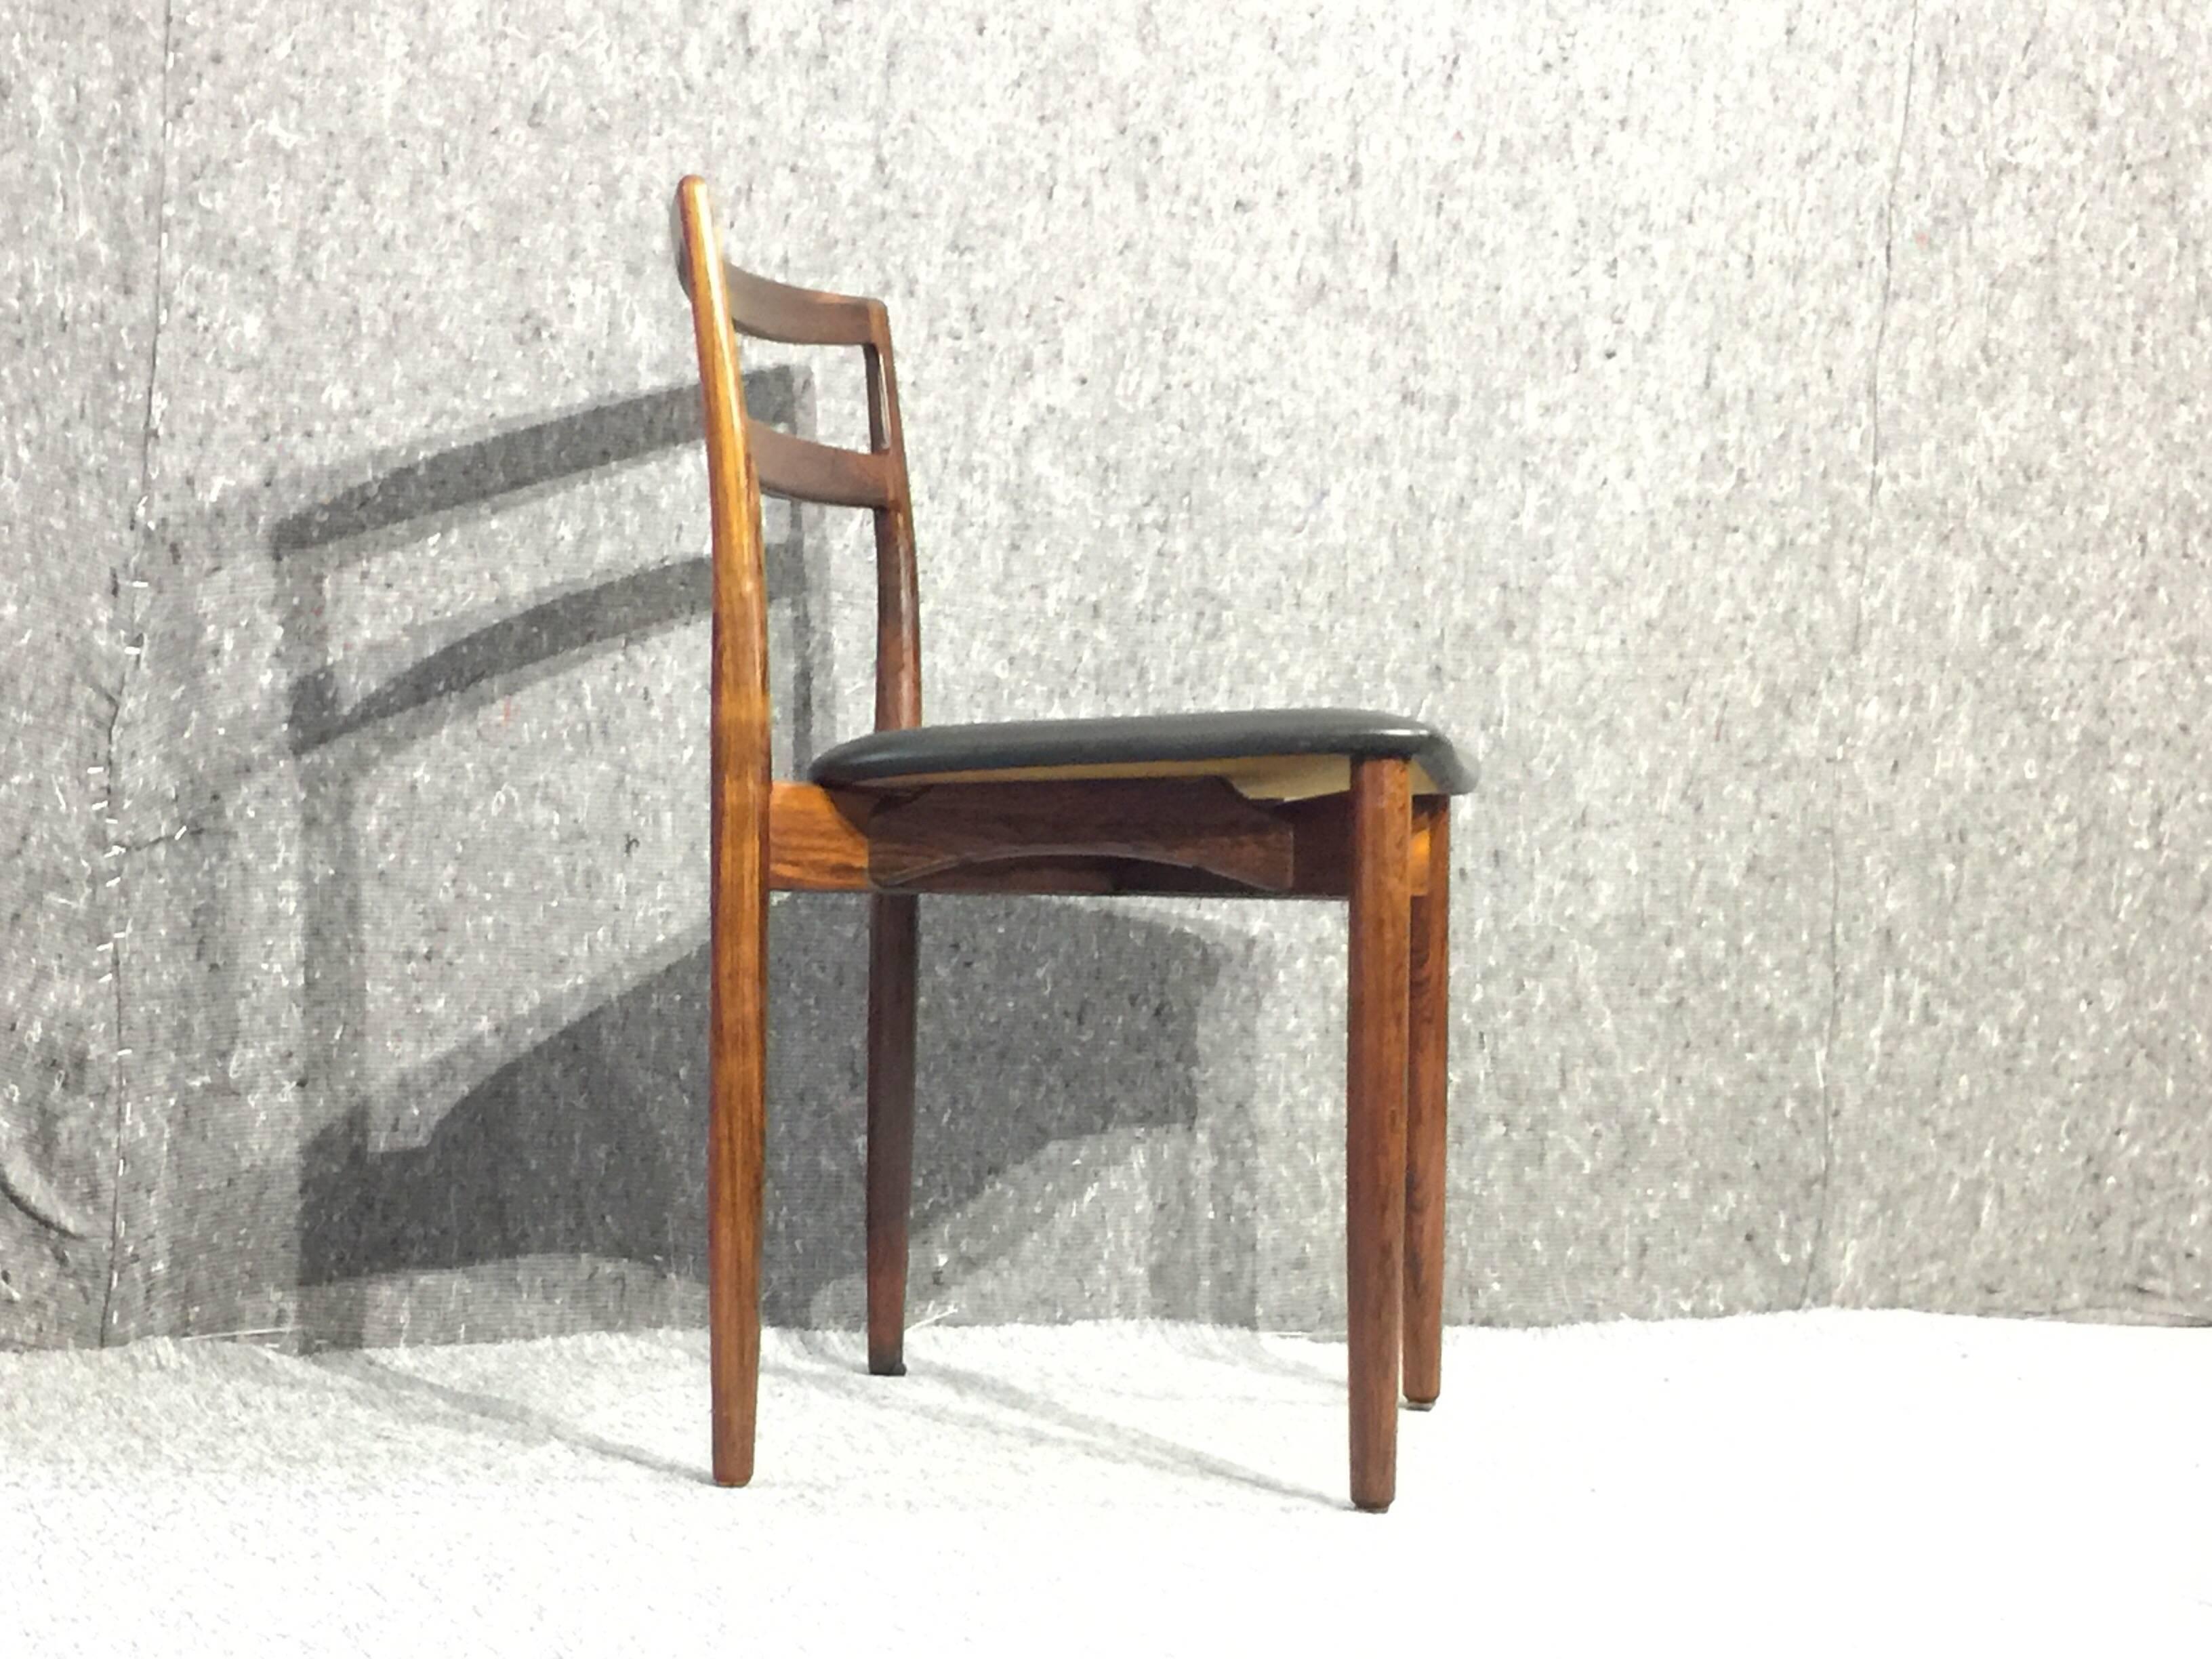 Stunning dining chairs designed by Harry Østergaard in the 1960s and produced by Randers Møbelfabrik. The frame is made out of rosewood and upholstery in black leather.